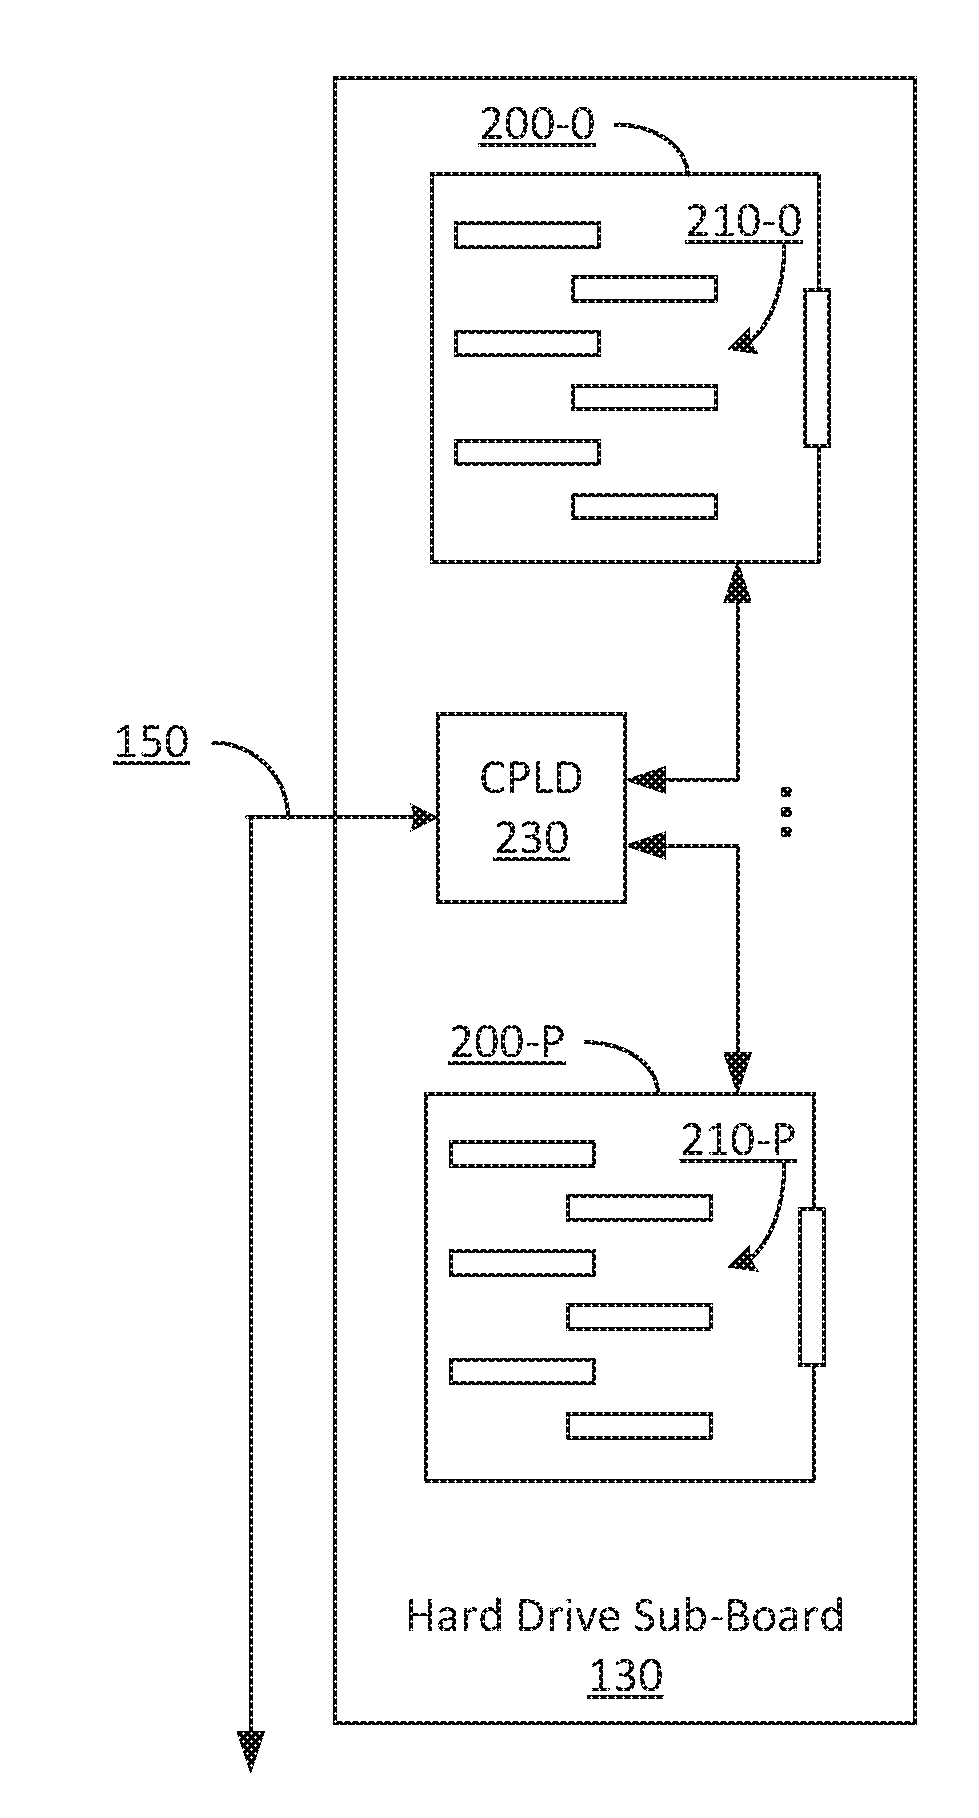 Storage enclosure with daisy-chained sideband signal routing and distributed logic devices